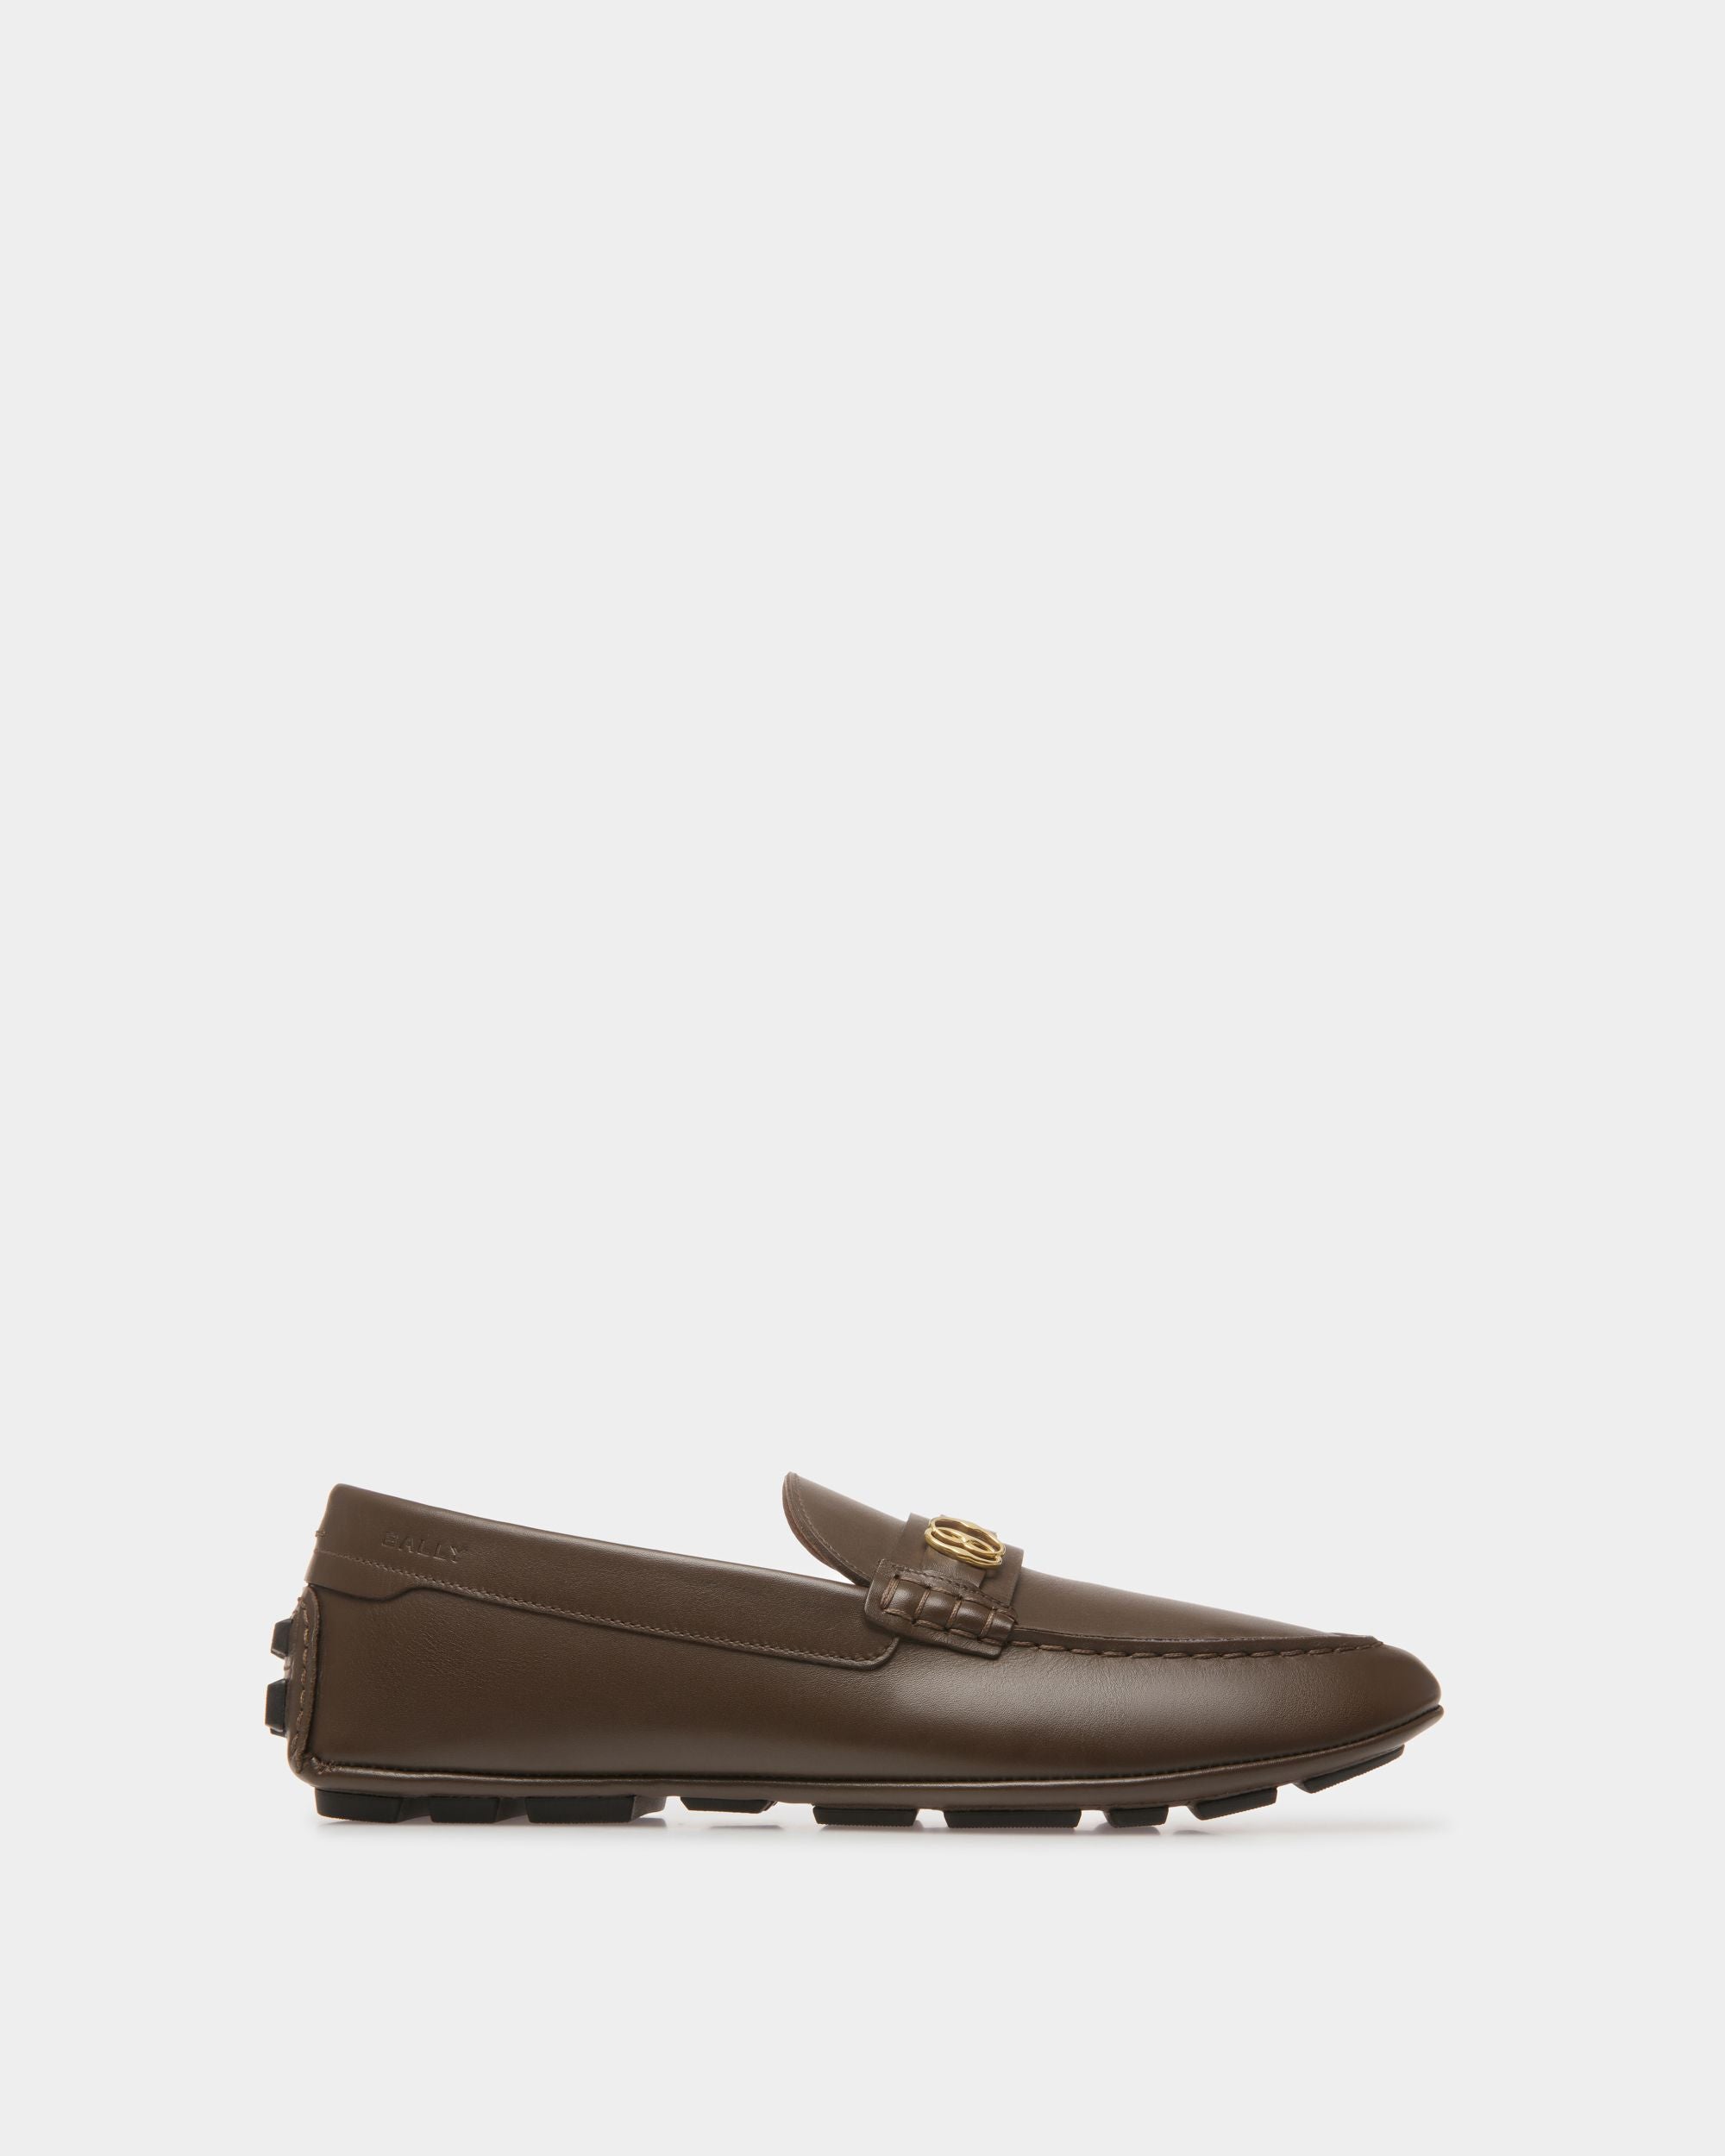 Men's Kerbs Drivers In Brown Leather | Bally | Still Life Side